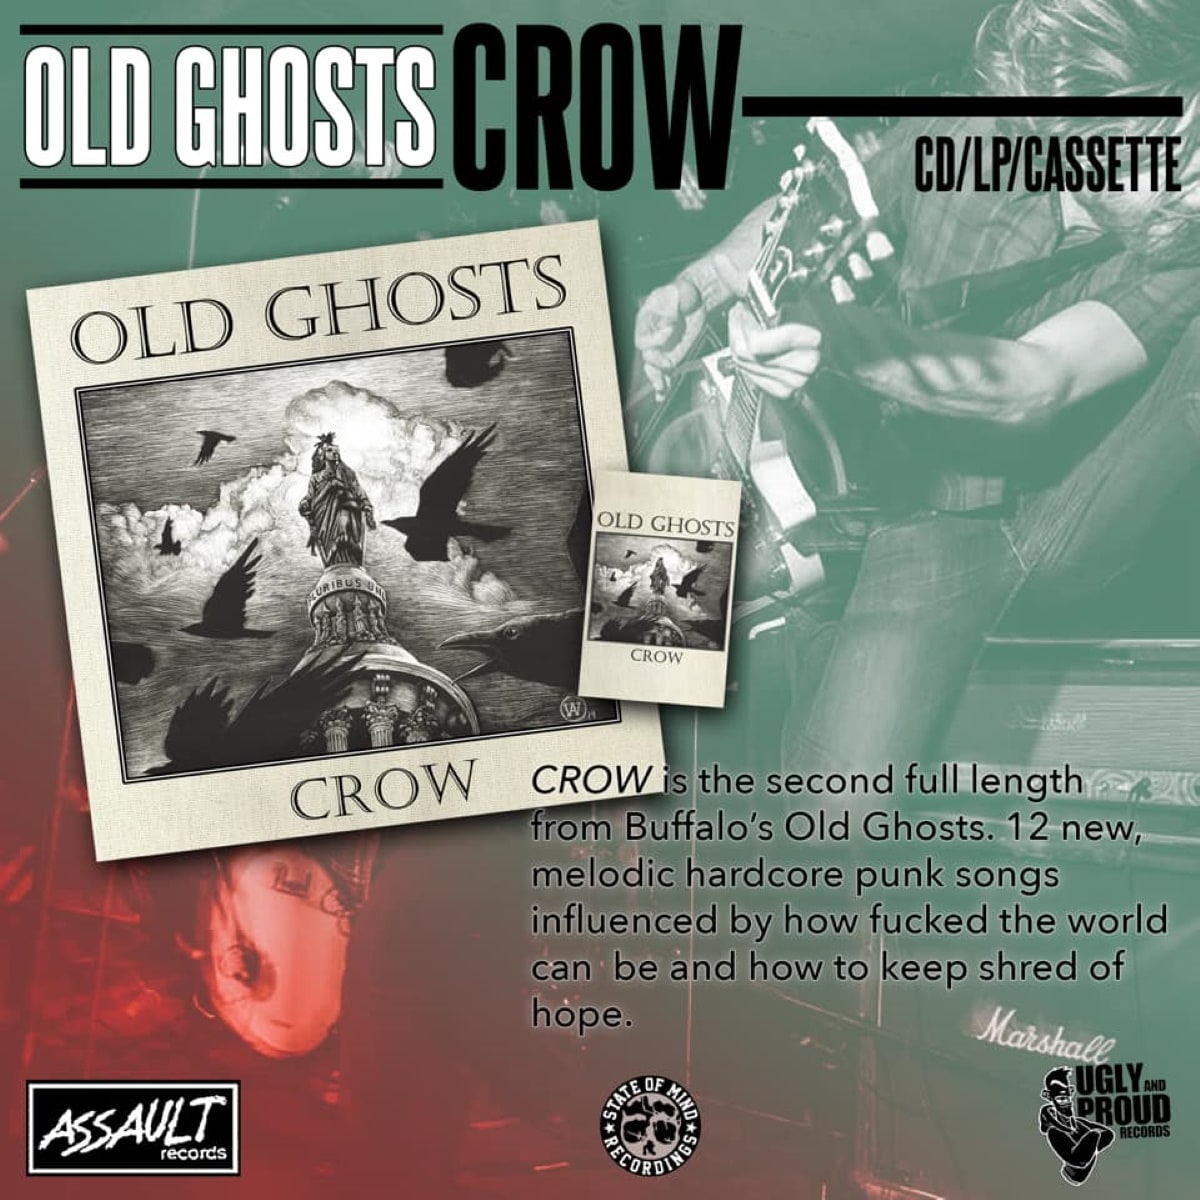 OLD GHOSTS promo